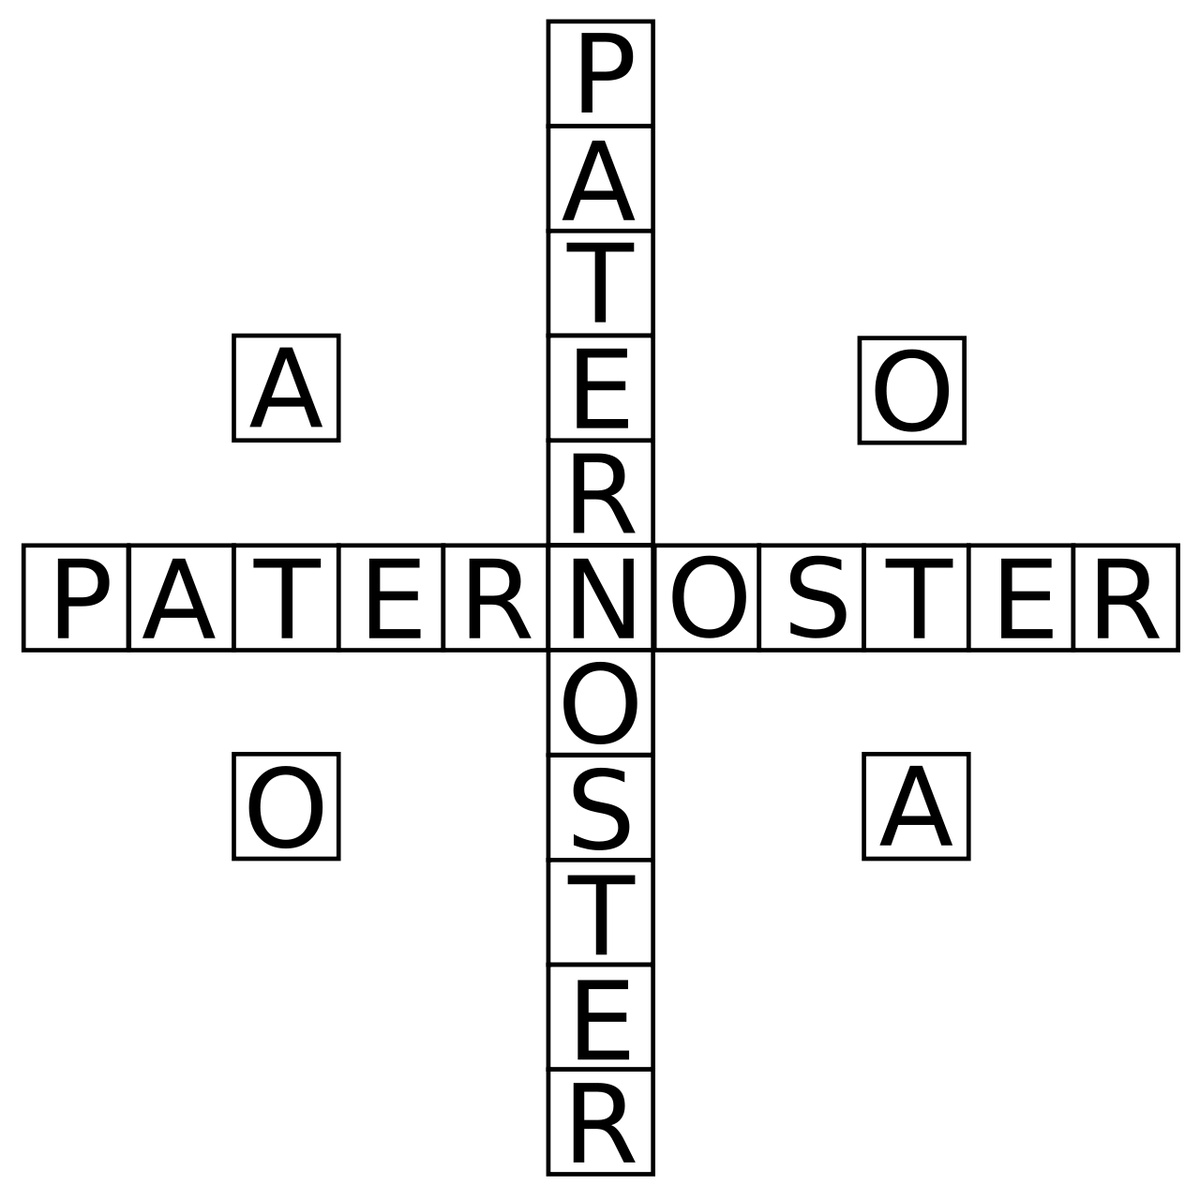 A cross which reads Pater Noster in both directions, flanked by two A’s and two O’s.